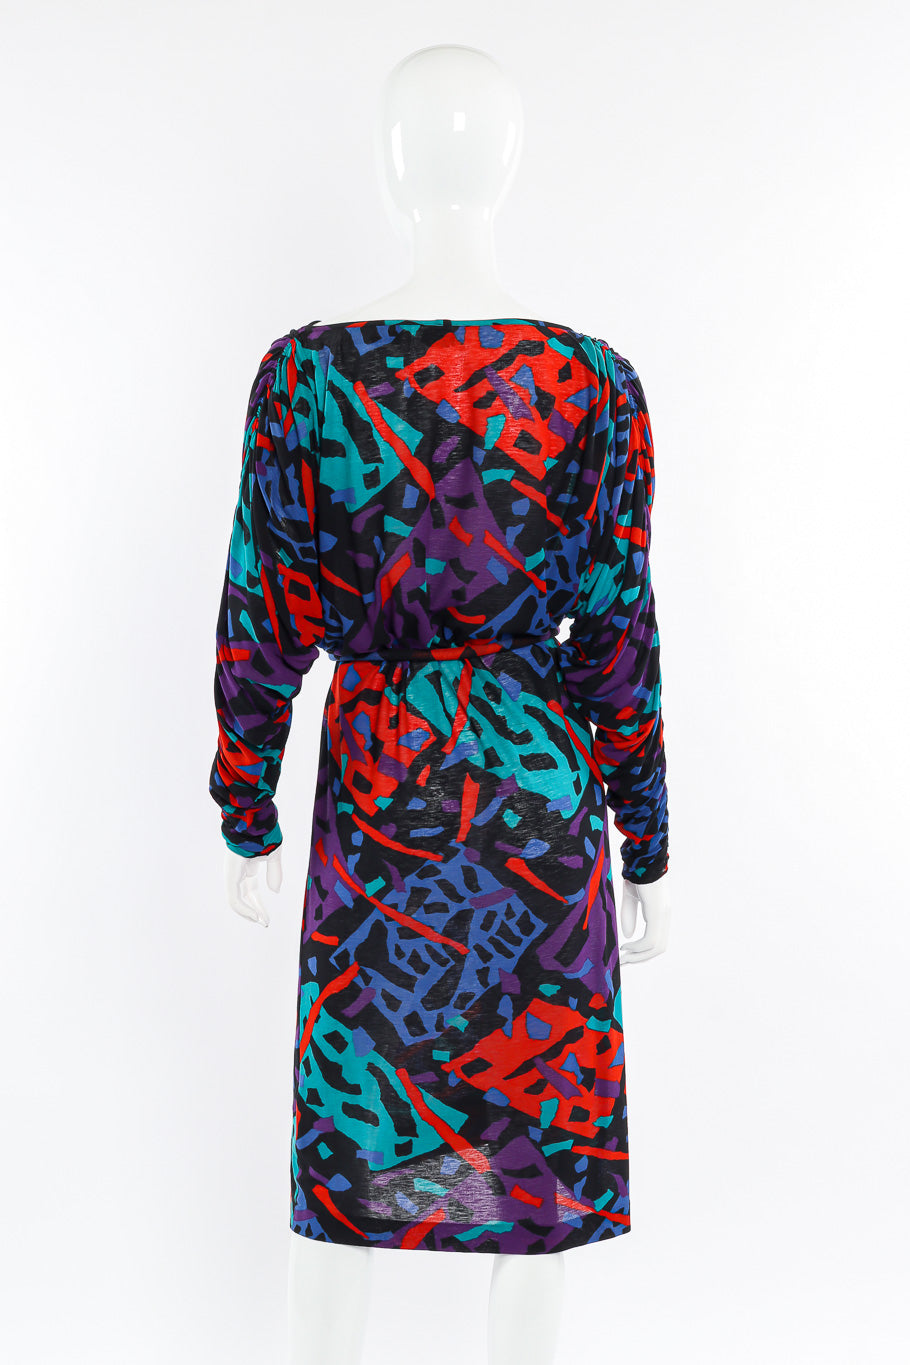 Ruched sleeve batwing dress by Missoni on mannequin back @recessla